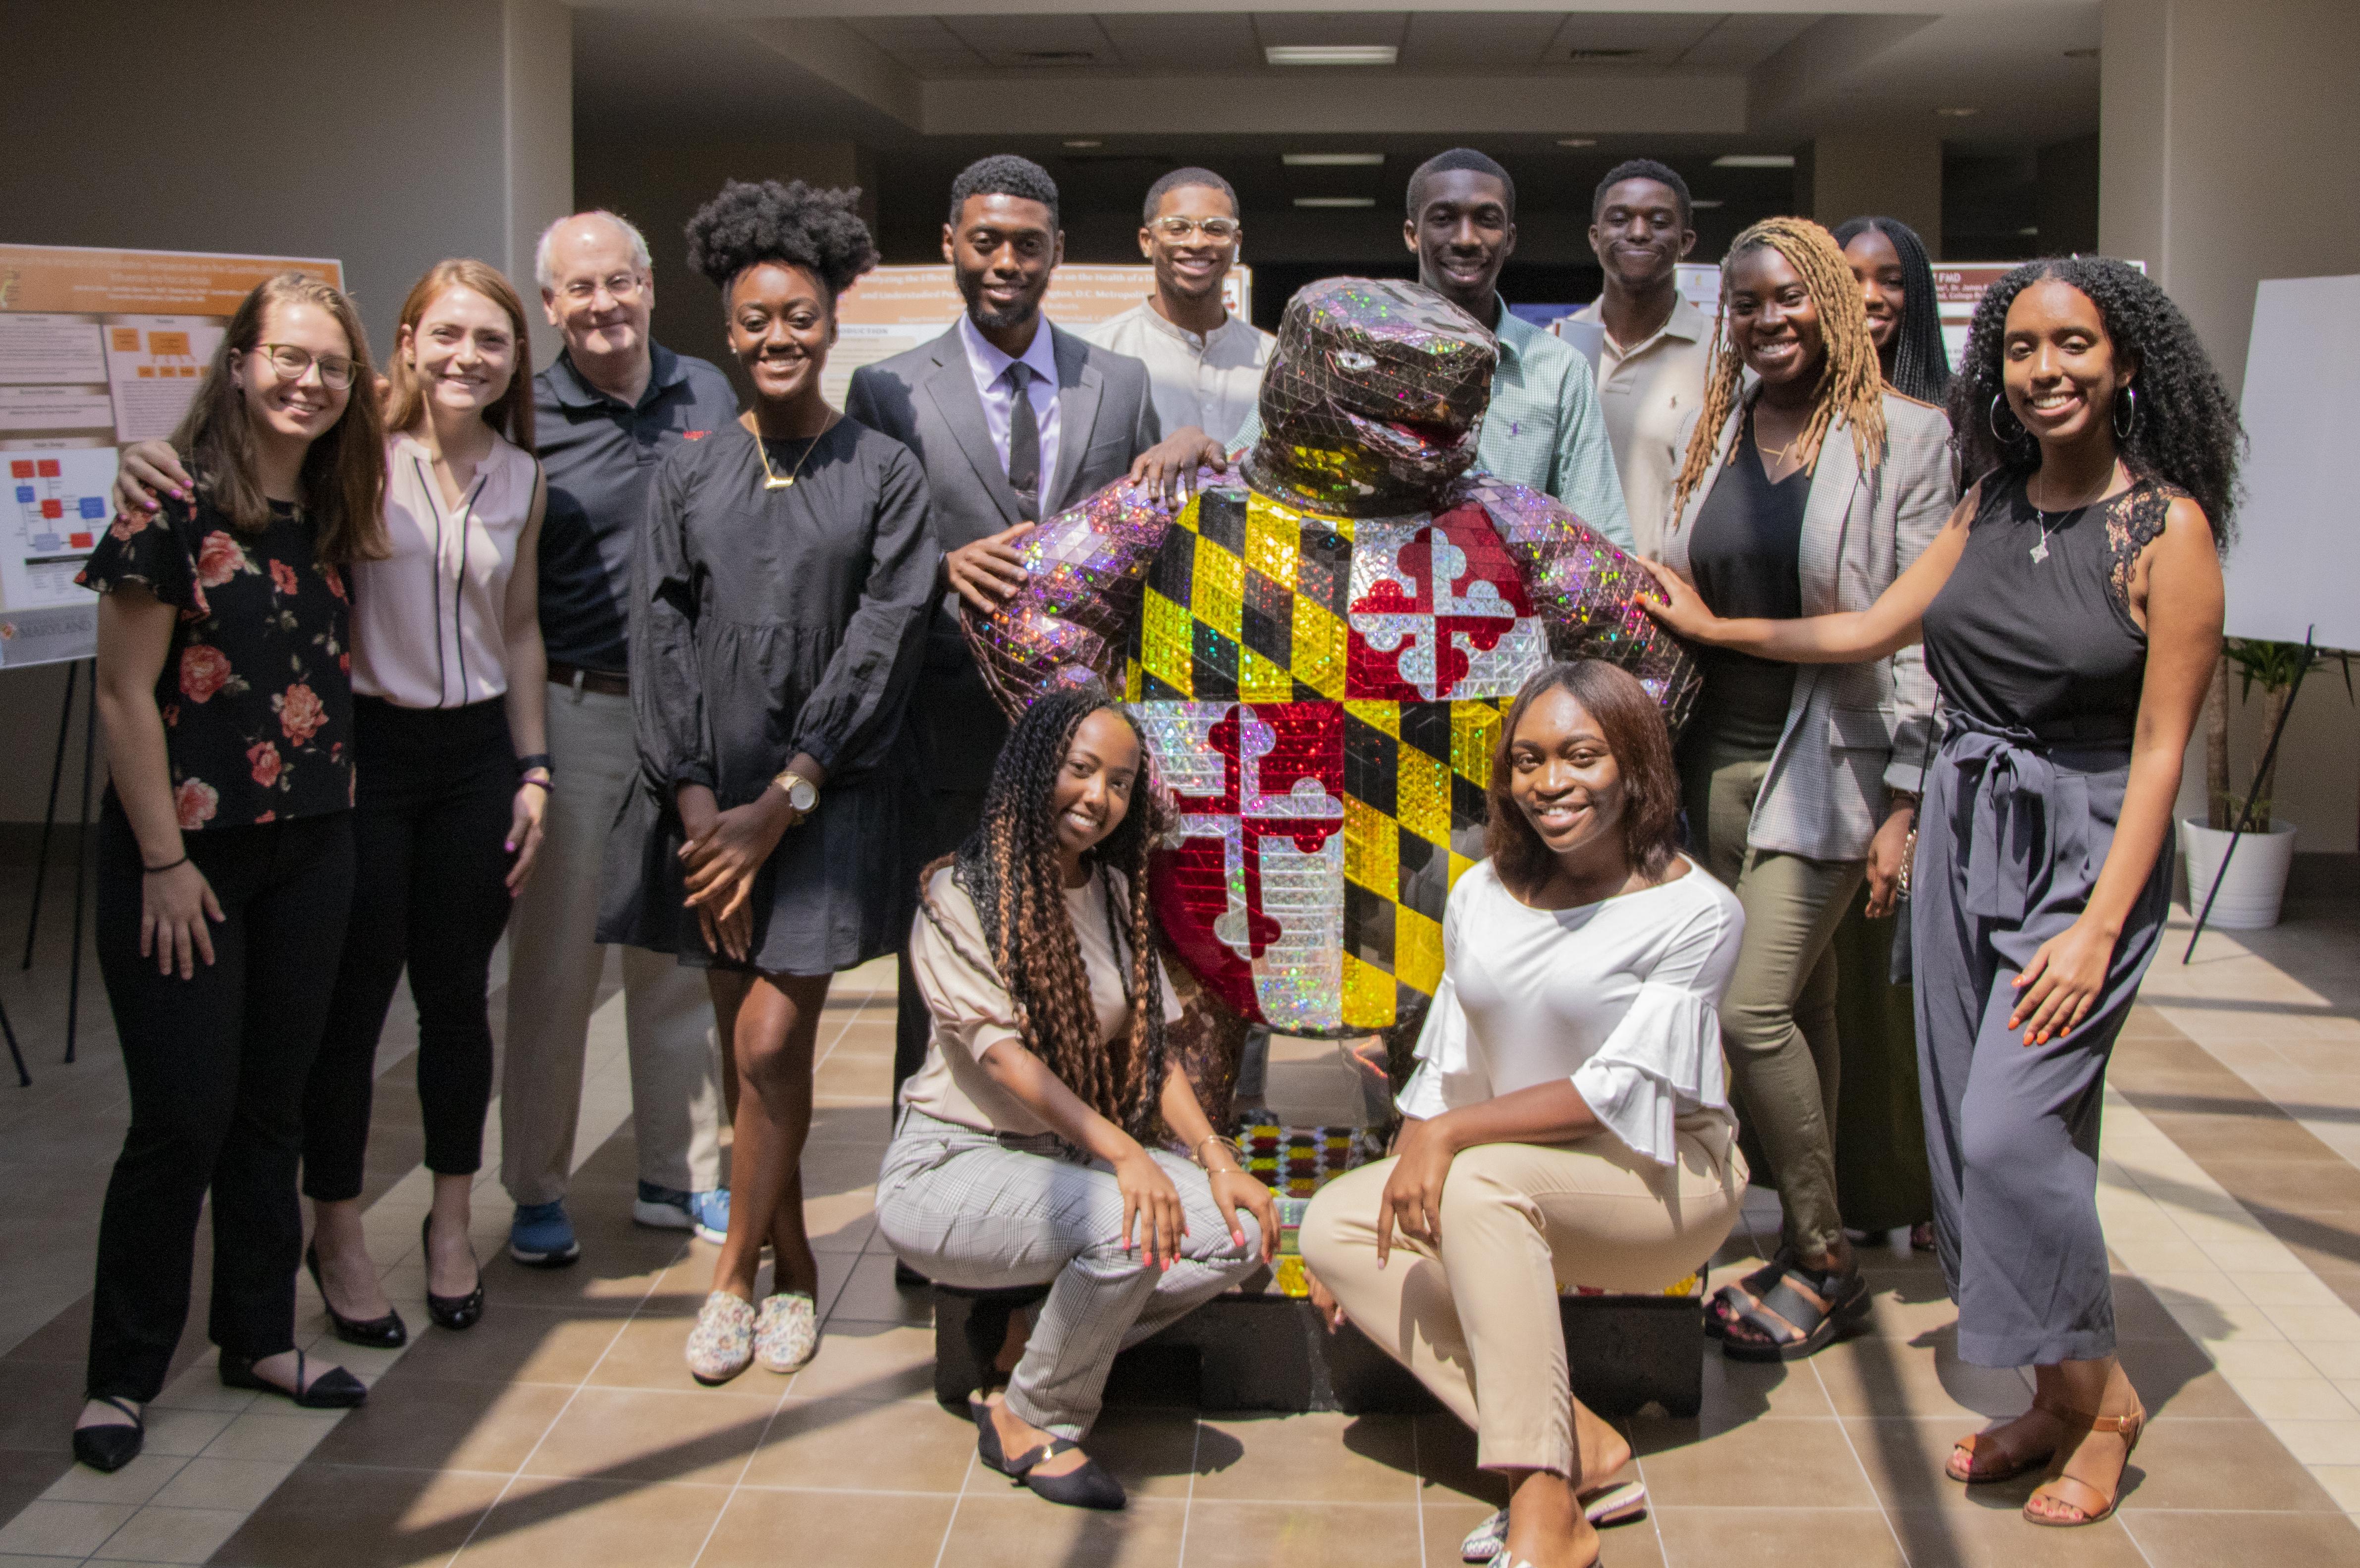 UMD ADAPT Cohort 2019 of the School of Public Health at the University of Maryland